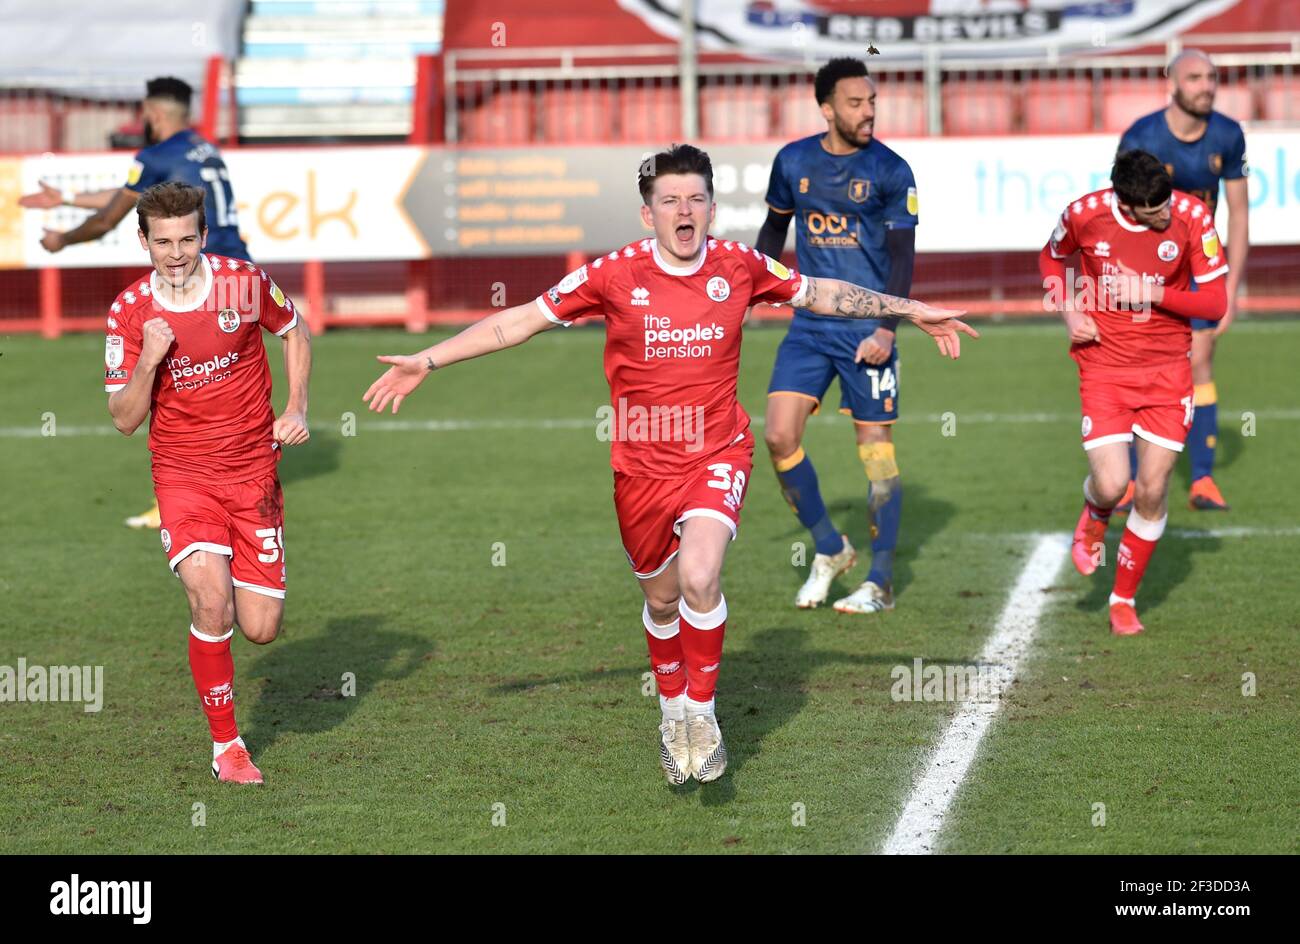 James Tilley of Crawley celebrates after scoring their late winner during the Sky Bet League Two match between Crawley Town and Mansfield Town at the People's Pension Stadium   , Crawley ,  UK - 13th March 2021 Photo Simon Dack / Telephoto Images.  - Editorial use only. No merchandising. For Football images FA and Premier League restrictions apply inc. no internet/mobile usage without FAPL license - for details contact Football Dataco Stock Photo